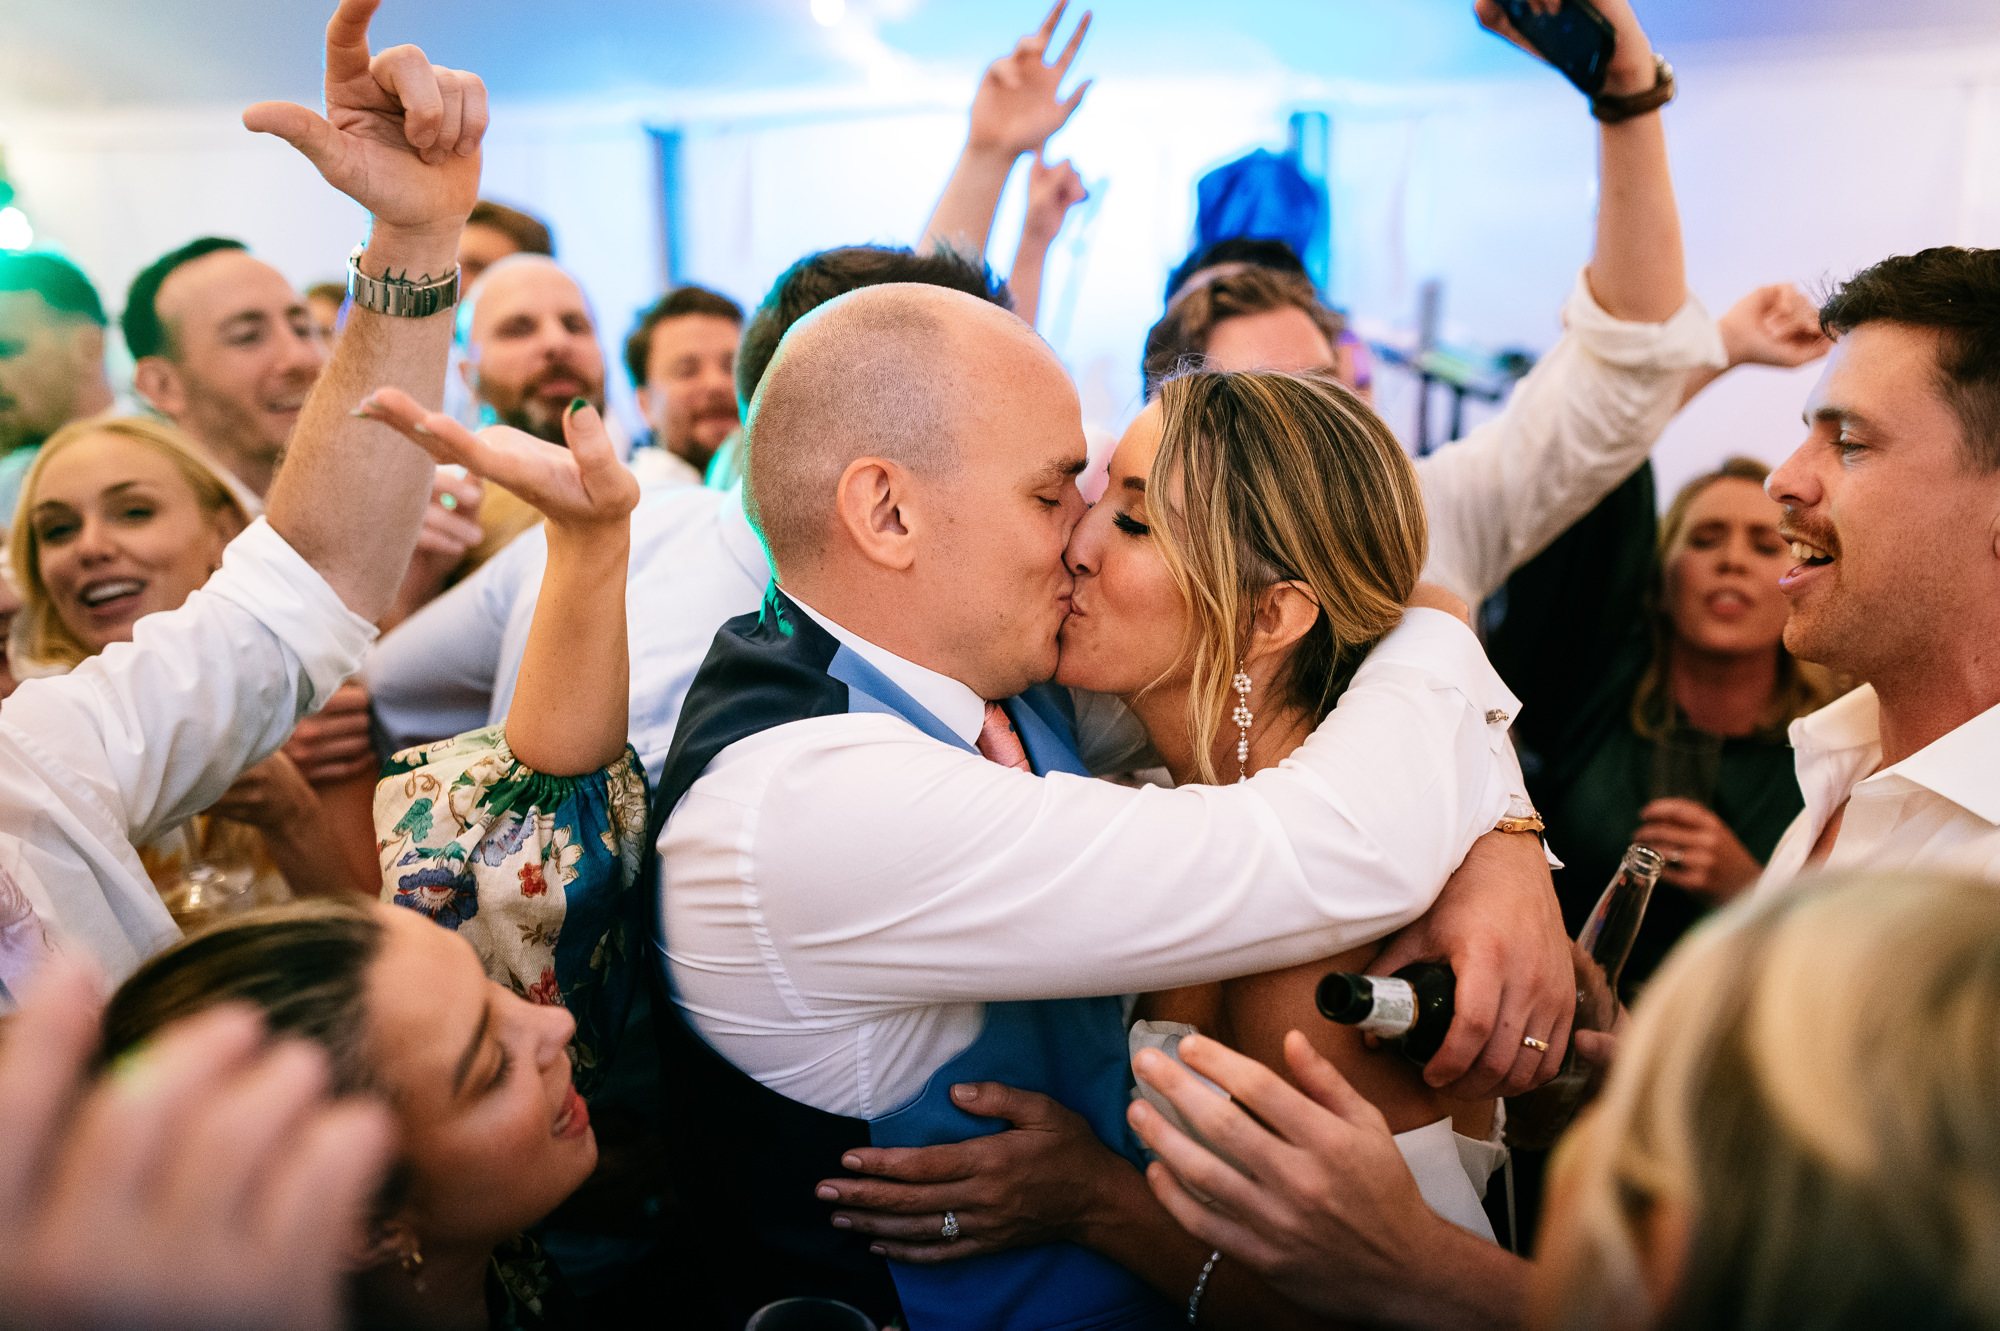 newlyweds kissing on the dance floor surrounded by their guests